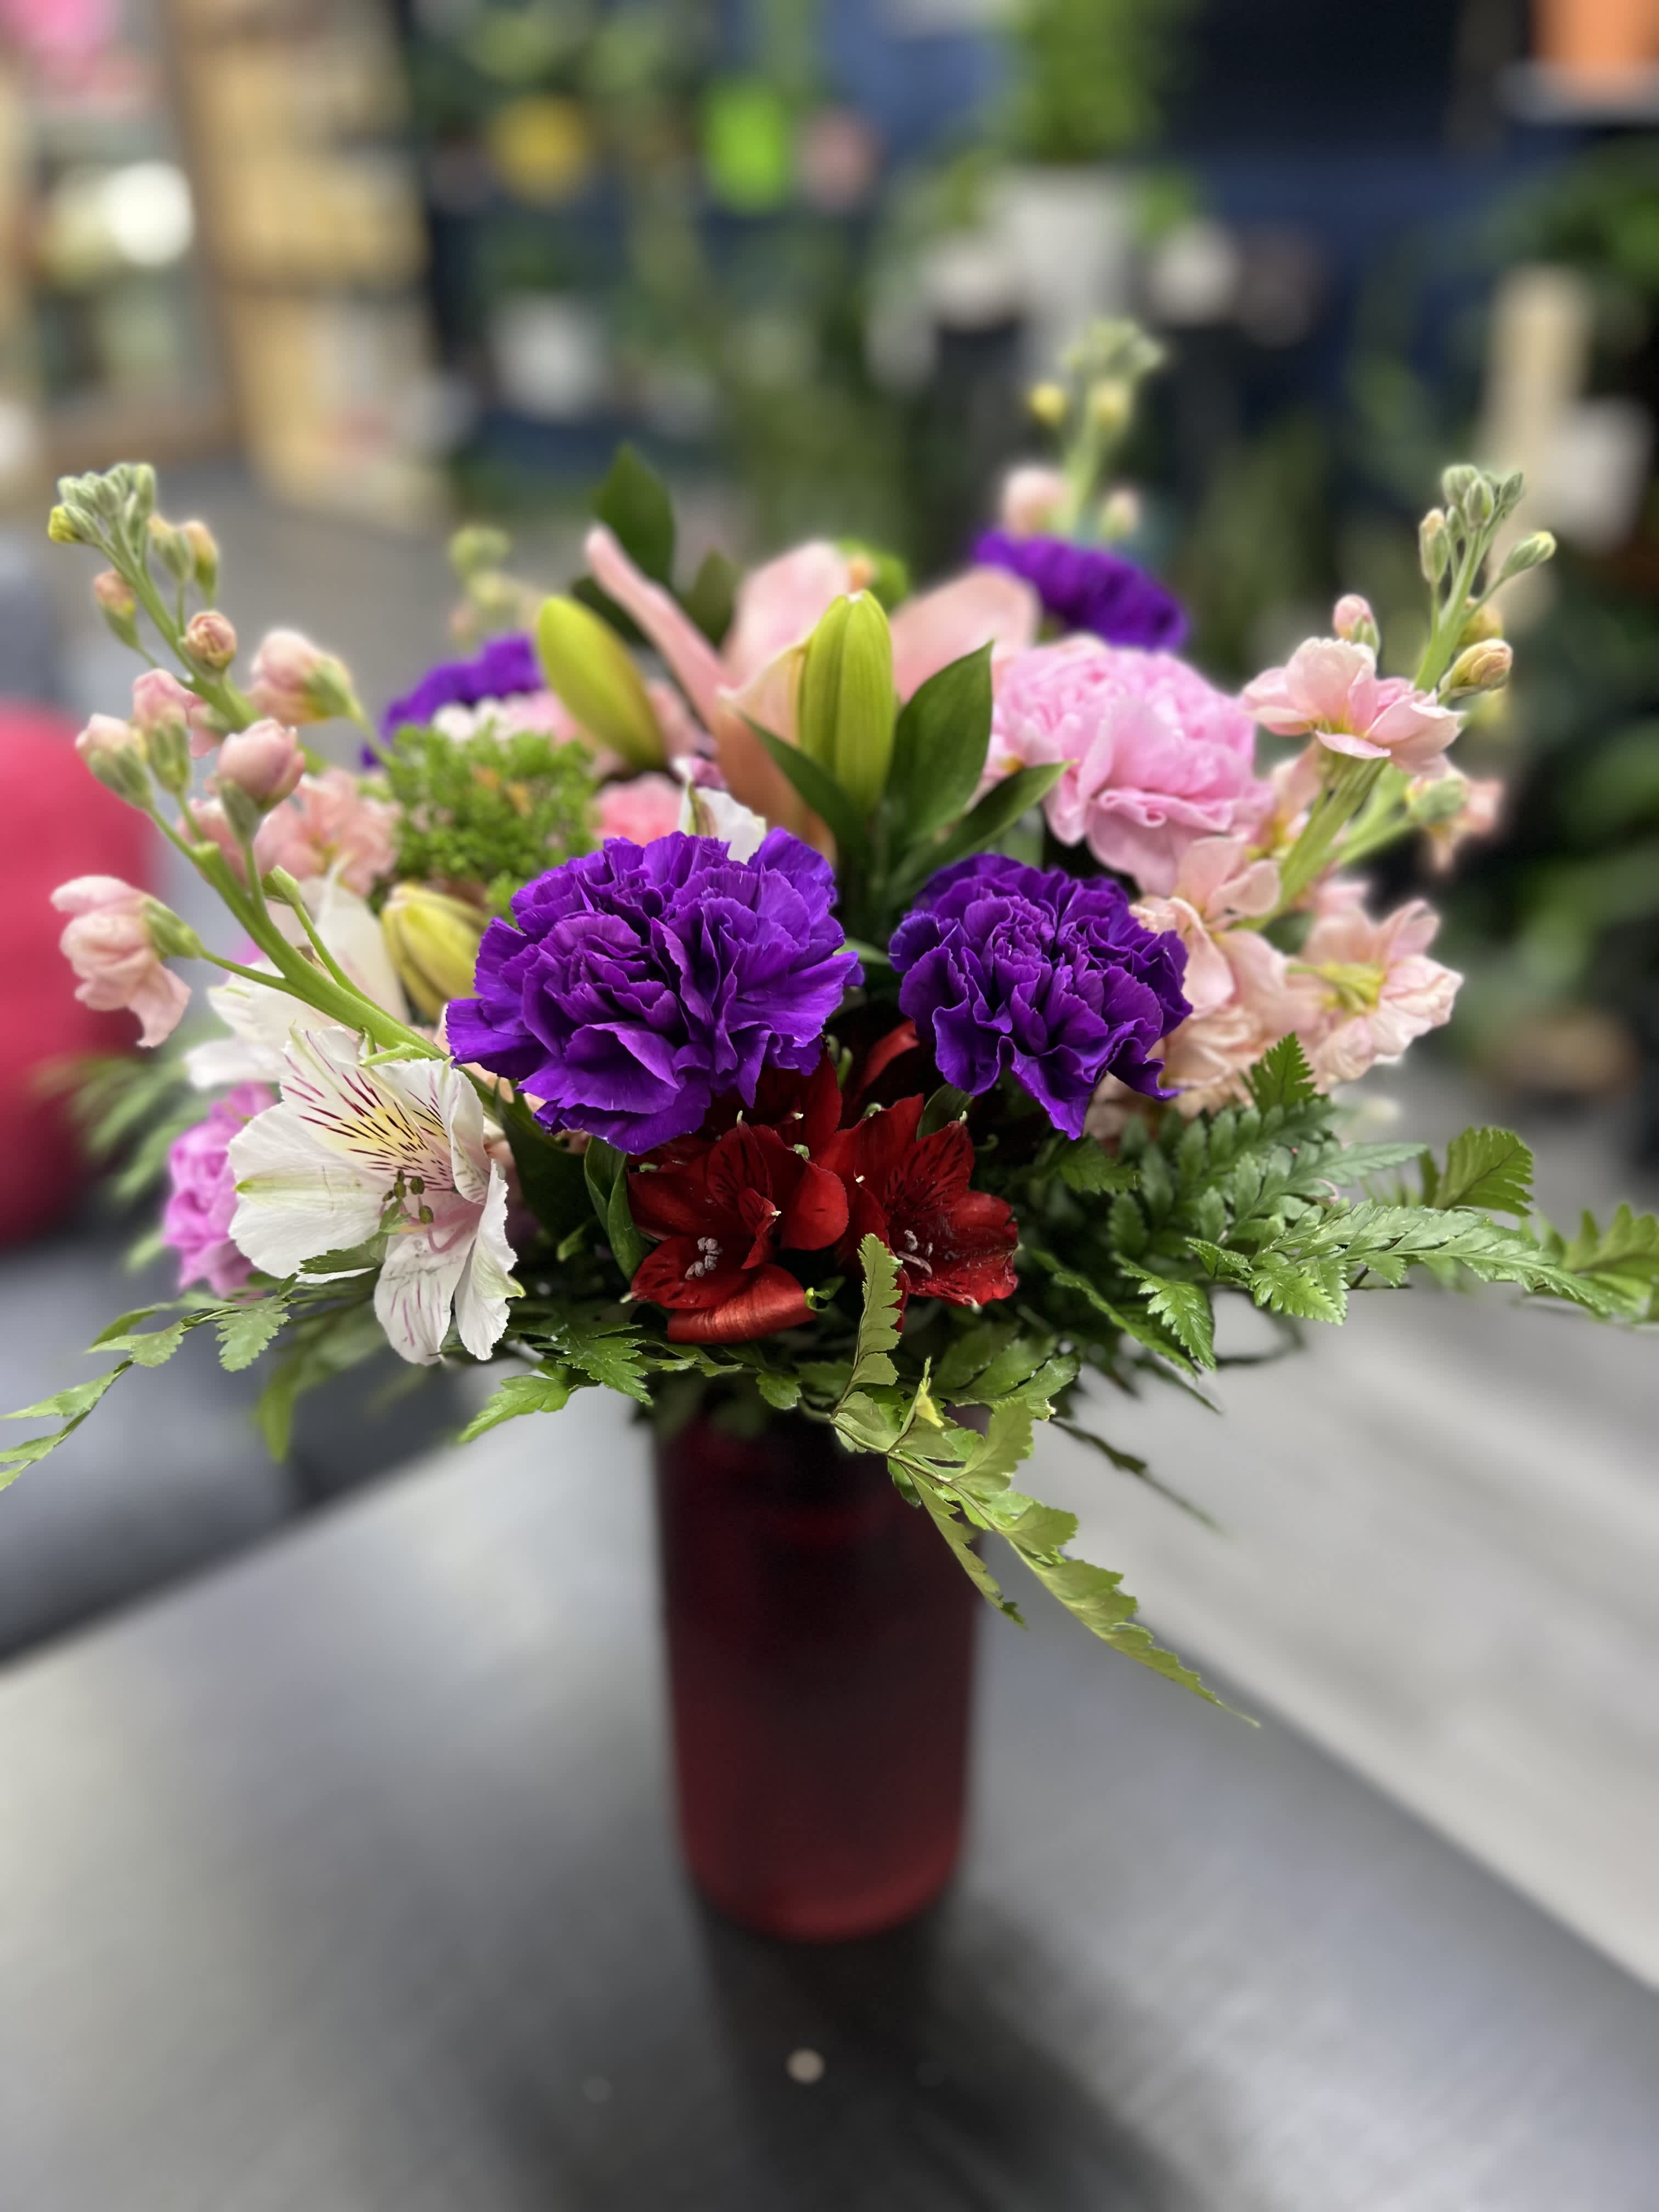 Fuego Floral  - &quot;Fuego Floral is ideal for expressing intense and passionate emotions. A perfect gift for celebrating anniversaries, romantic moments, or as a striking present on special occasions where you want to convey a message of heartfelt affection.&quot;